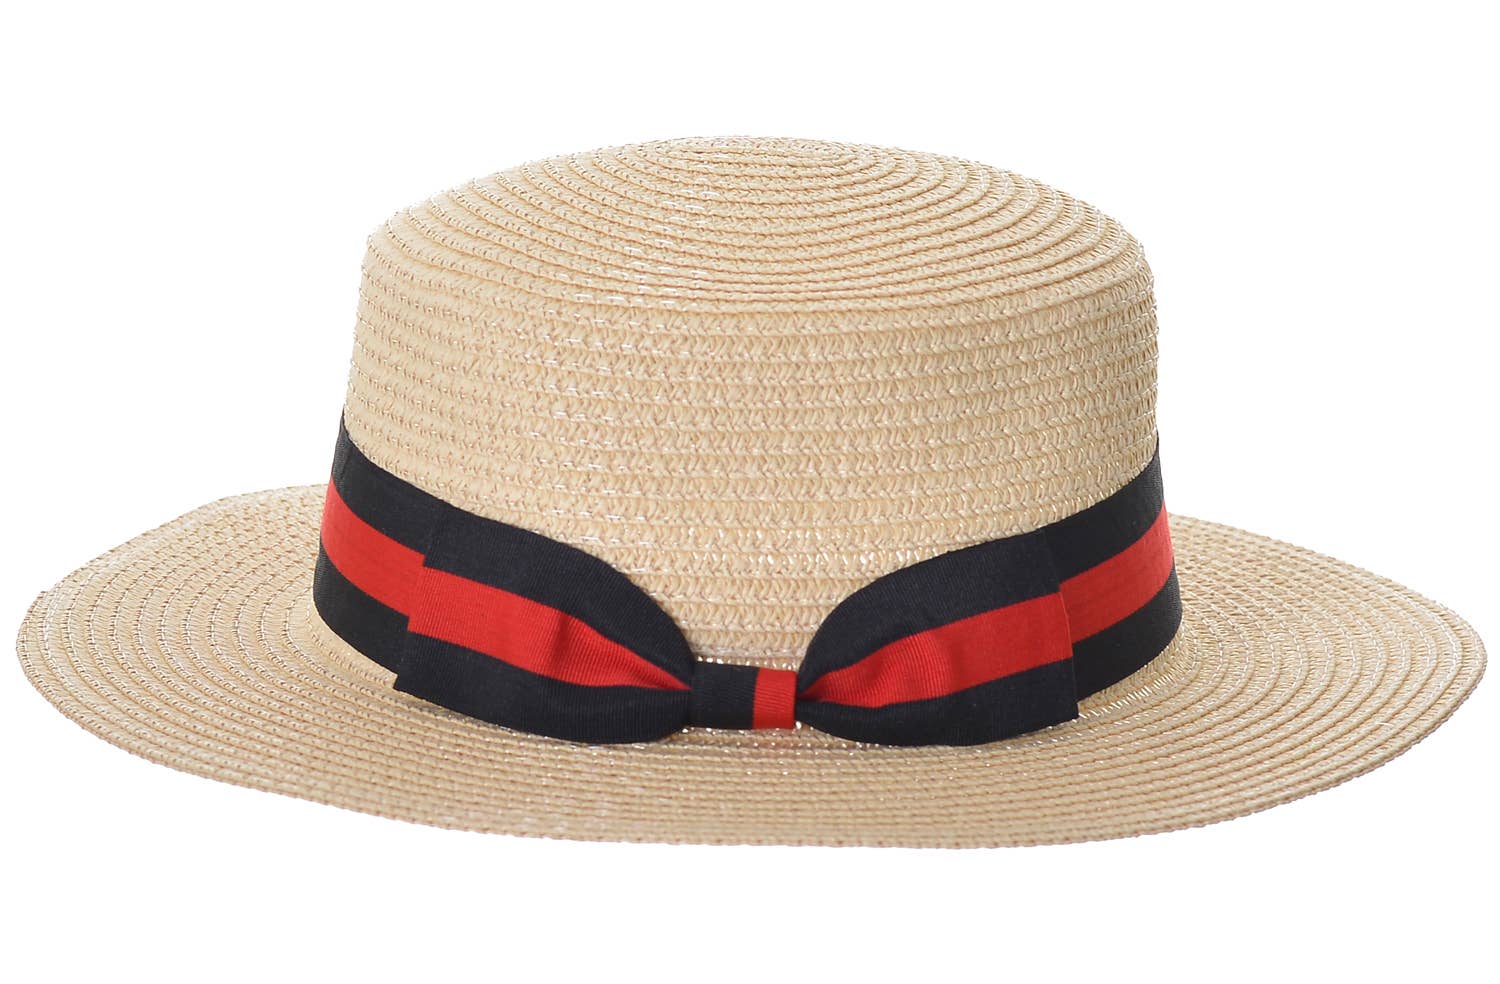 Adult's Boater Barbershop Gatsby Costume Hat Accessory Close up Image